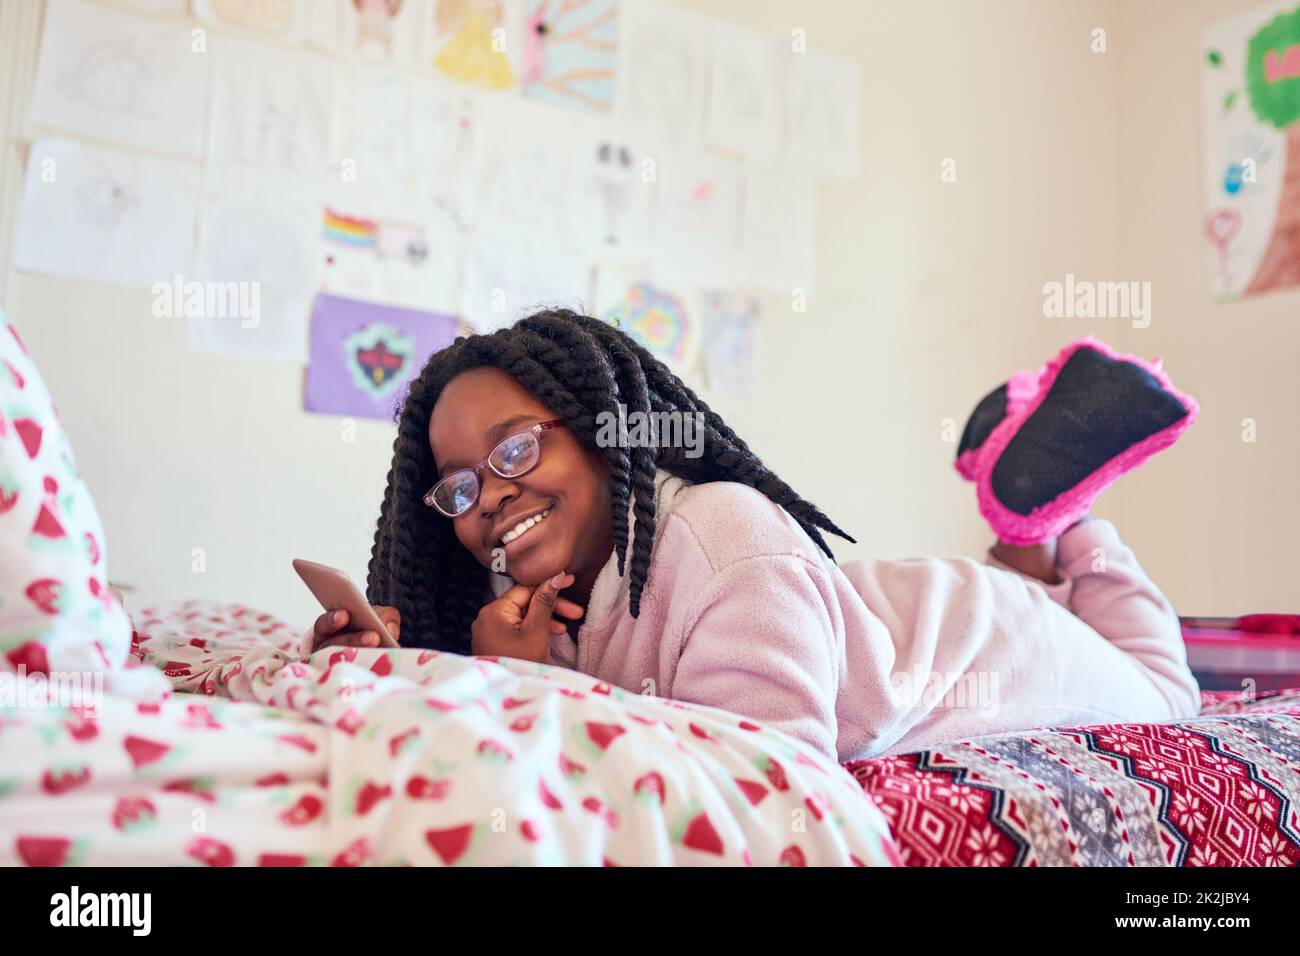 Early morning social networking. Shot of an adorable little girl using a cellphone on her bed in her bedroom. Stock Photo